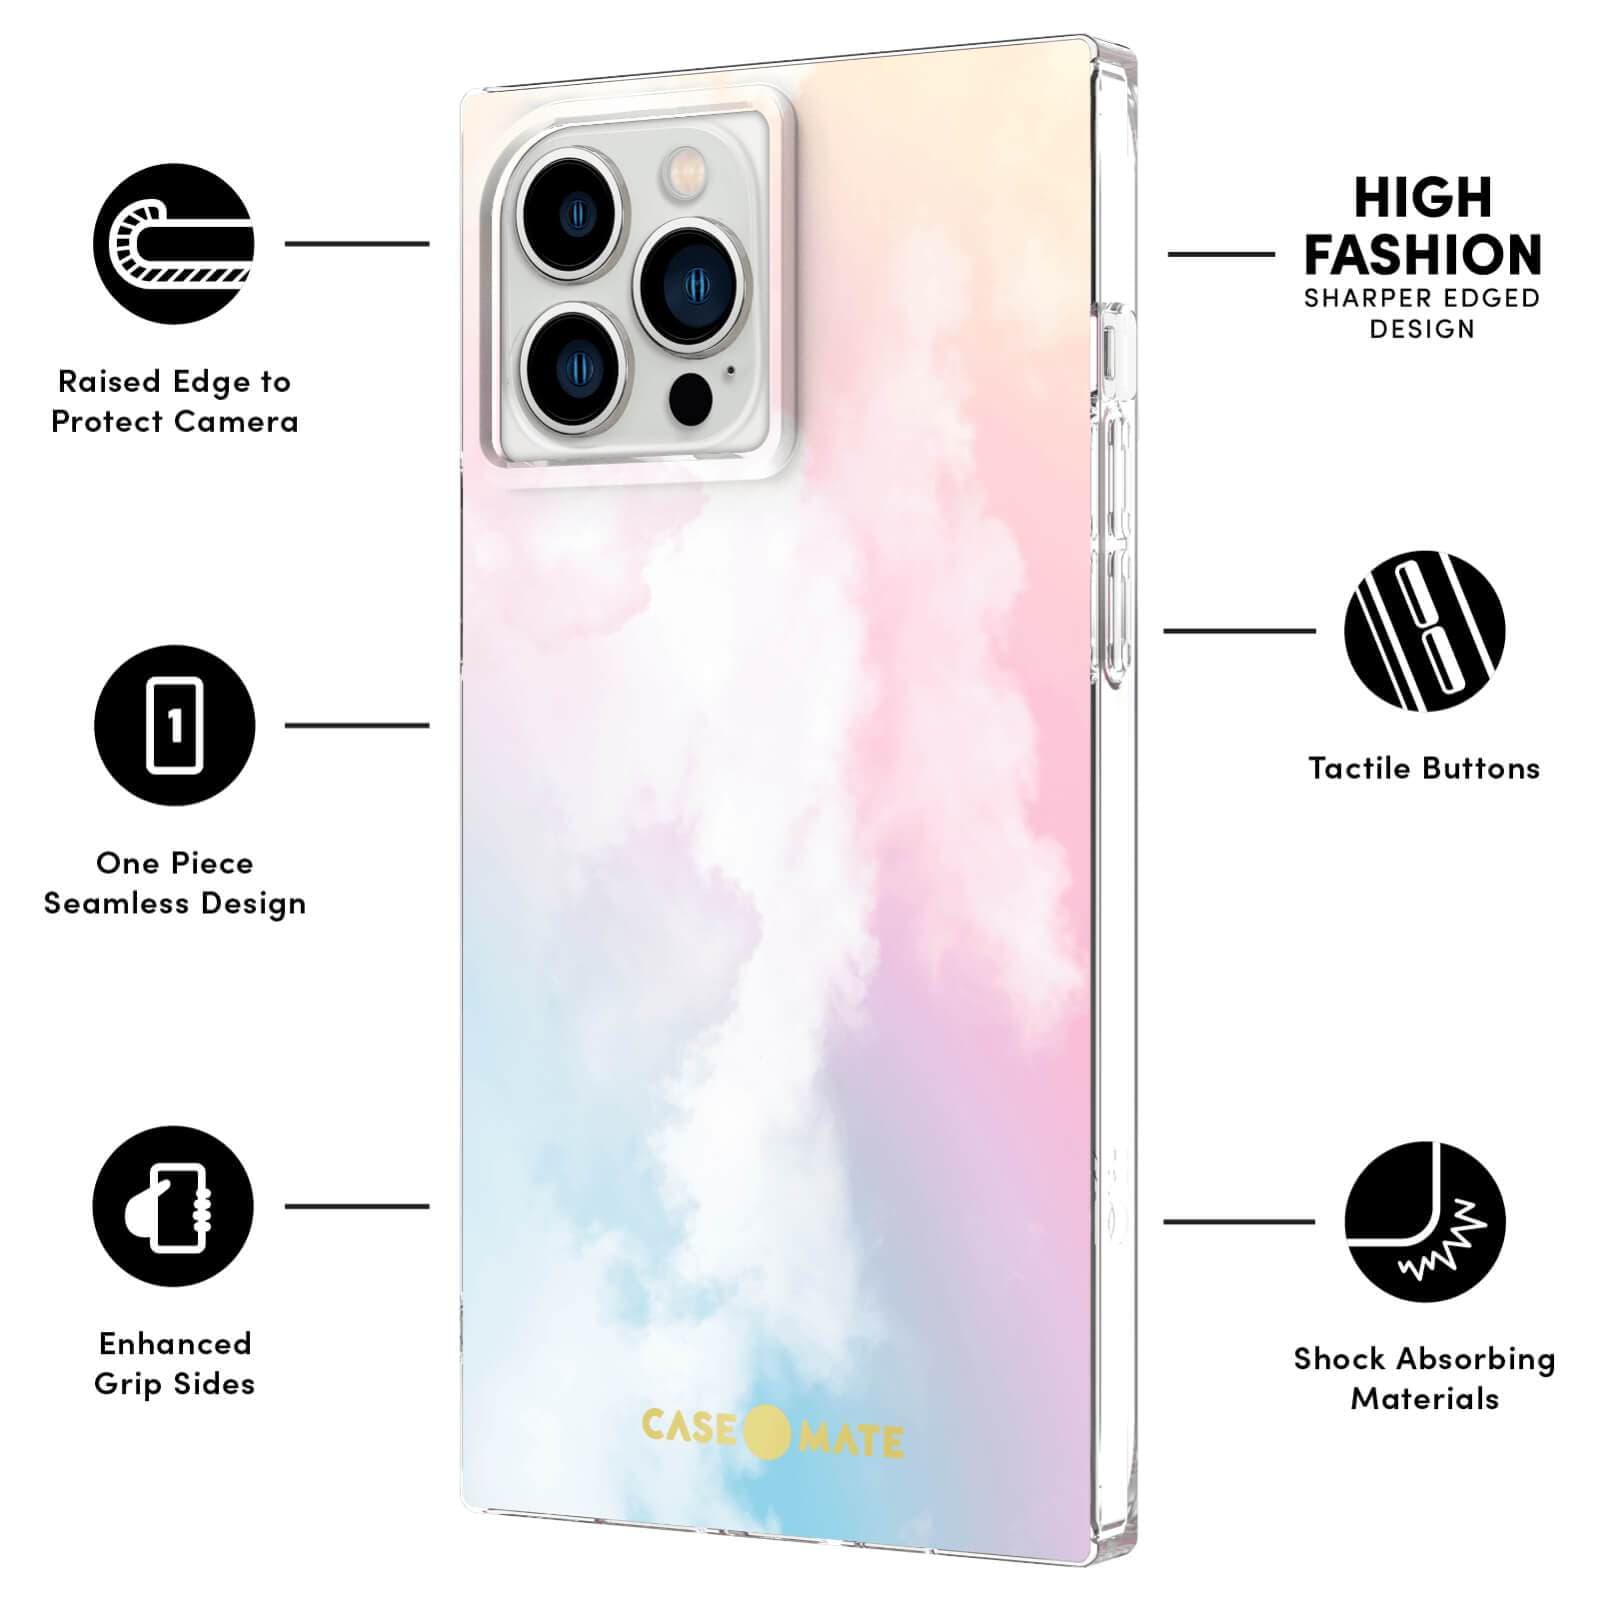 FEATURES: RAISED EDGE TO PROTECT CAMERA, ONE PIECE SEAMLESS DESIGN, ENHANCED GRIP SIDES, HIGH FASHION SHARPR EDGED DESIGN, TACTILE BUTTONS, SHOCK ABSORBING MATERIALS. COLOR::CLOUD 9